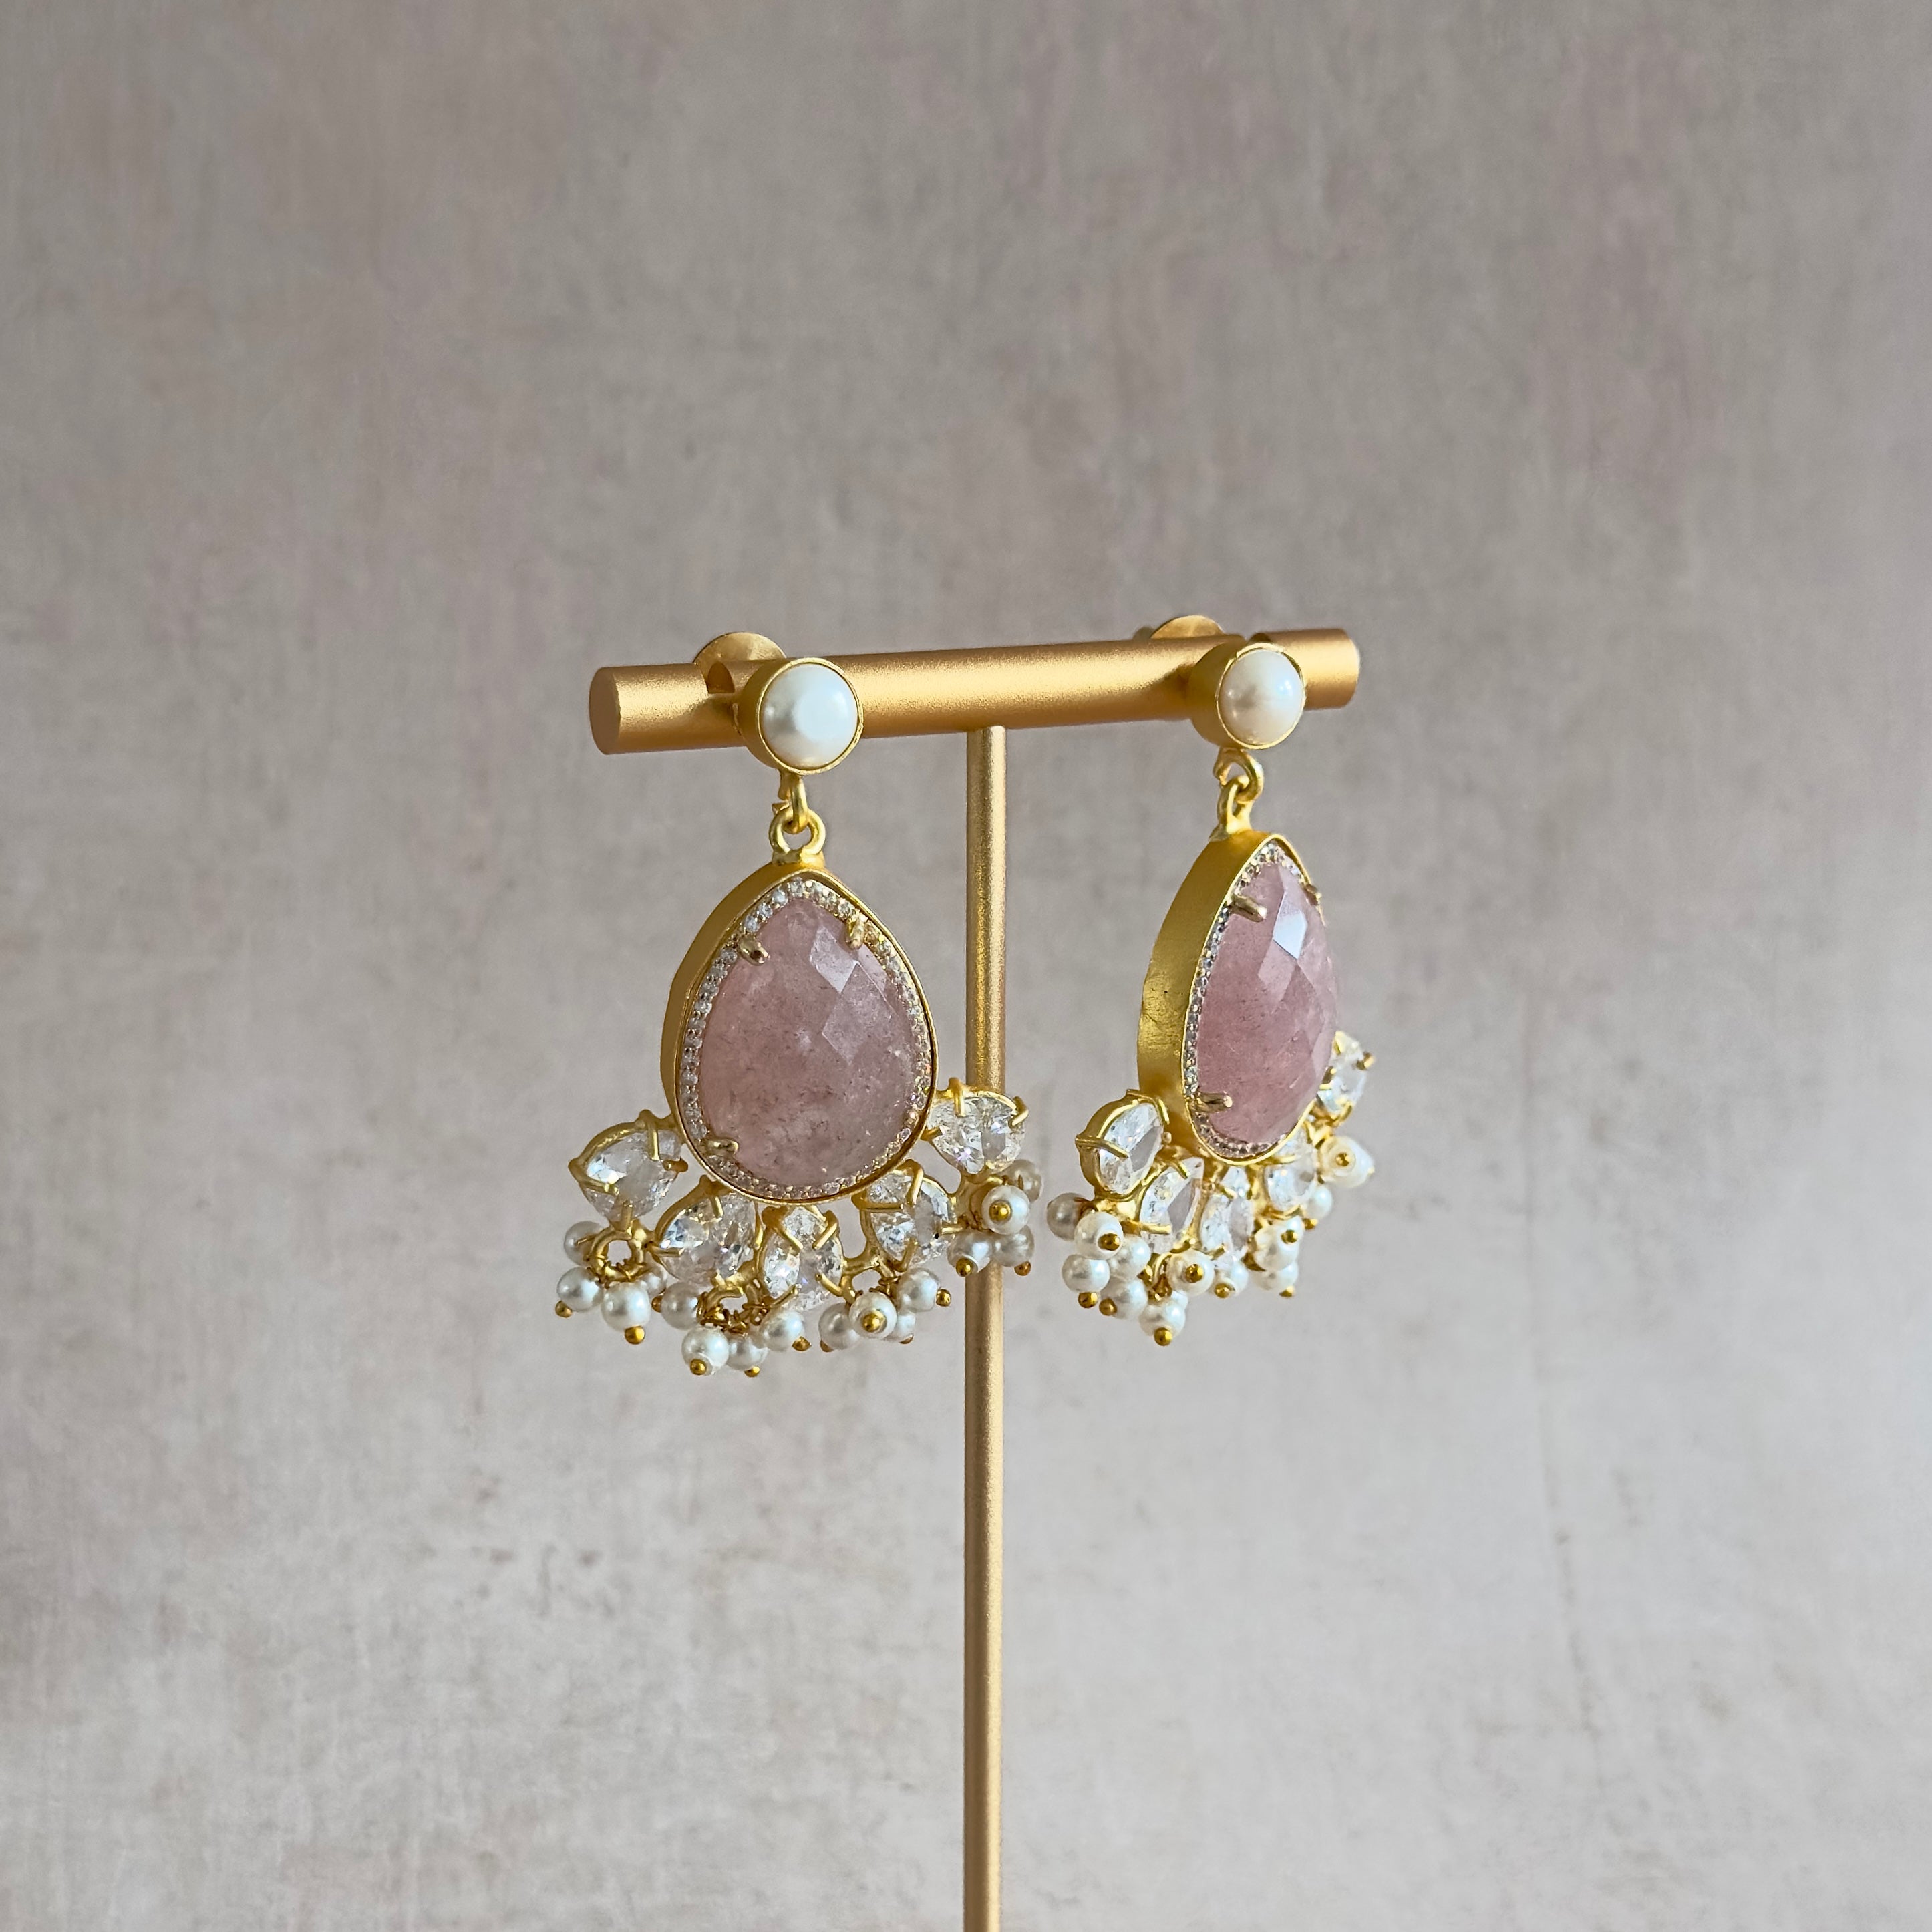 Bring out your inner grace with our Ciana Pink Crystal Pearl Drop Earrings. These rustic pink crystal stones, accented with cubic zirconia and a shimmering pearl, will add a touch of elegance to any outfit. Elevate your style and make a statement with these stunning earrings!